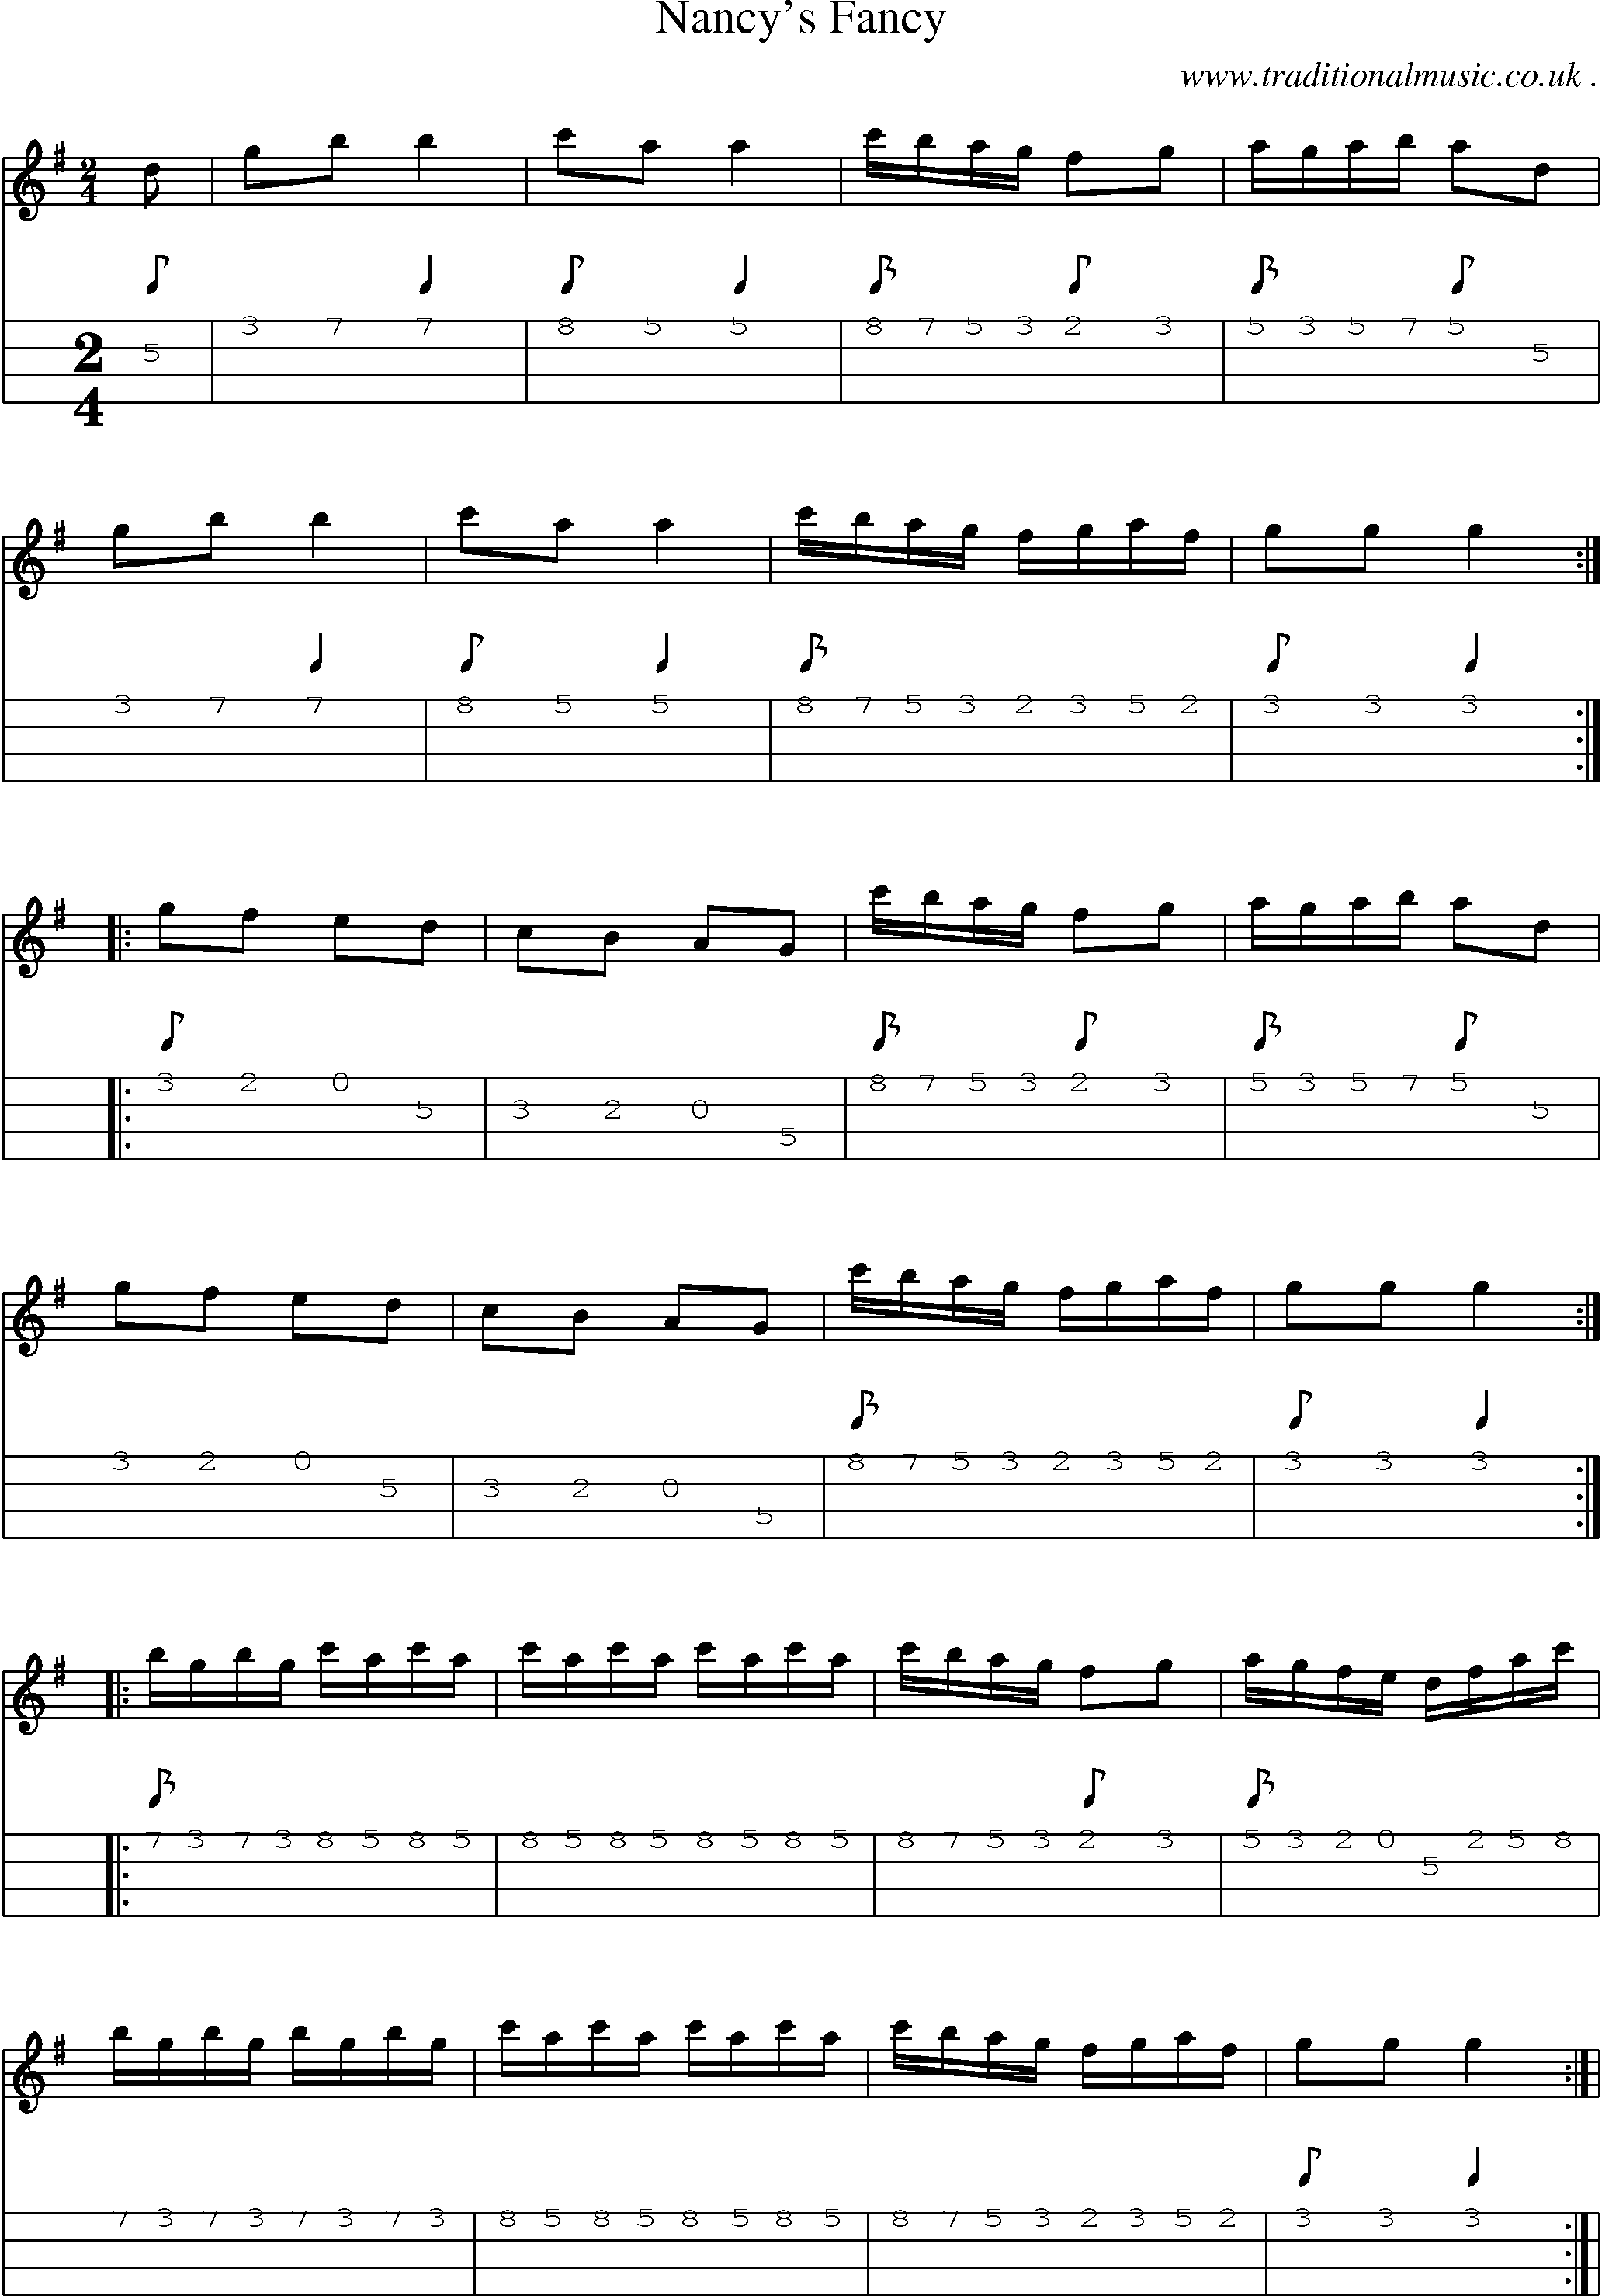 Sheet-Music and Mandolin Tabs for Nancys Fancy